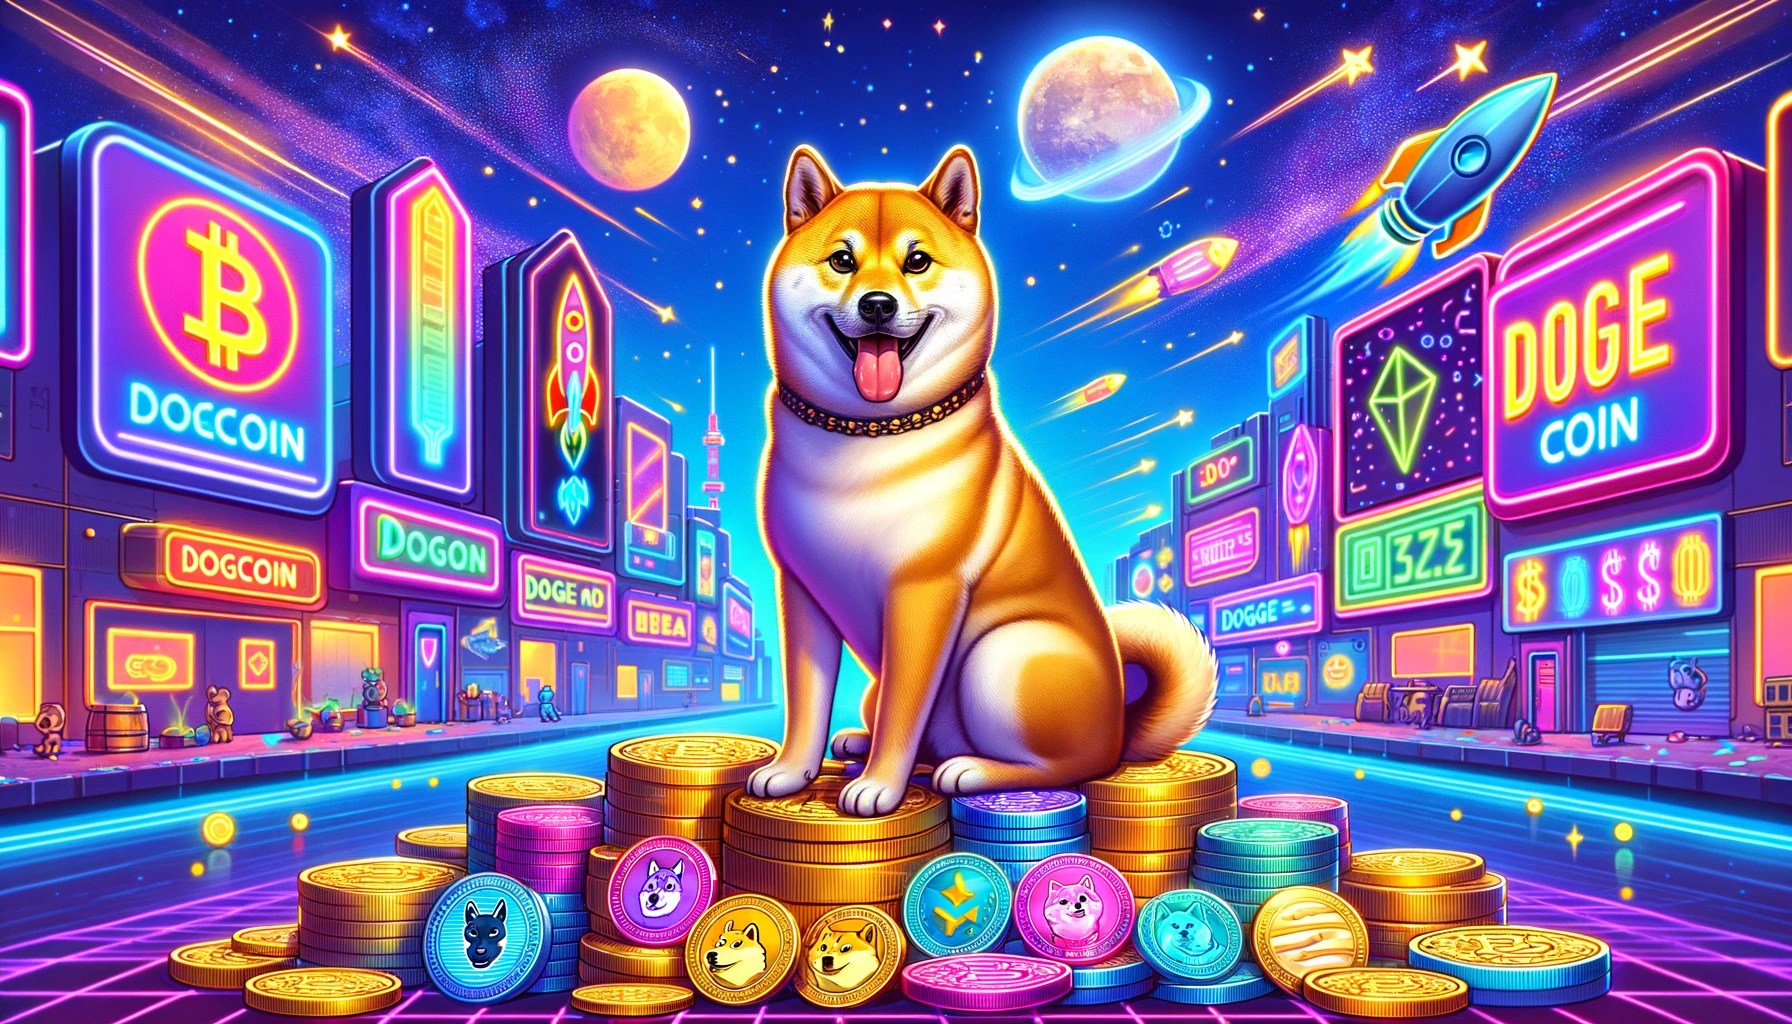 Dogecoin And Shiba Inu Fall Behind: Here Are The Top Meme Coin Performers In The Last Week